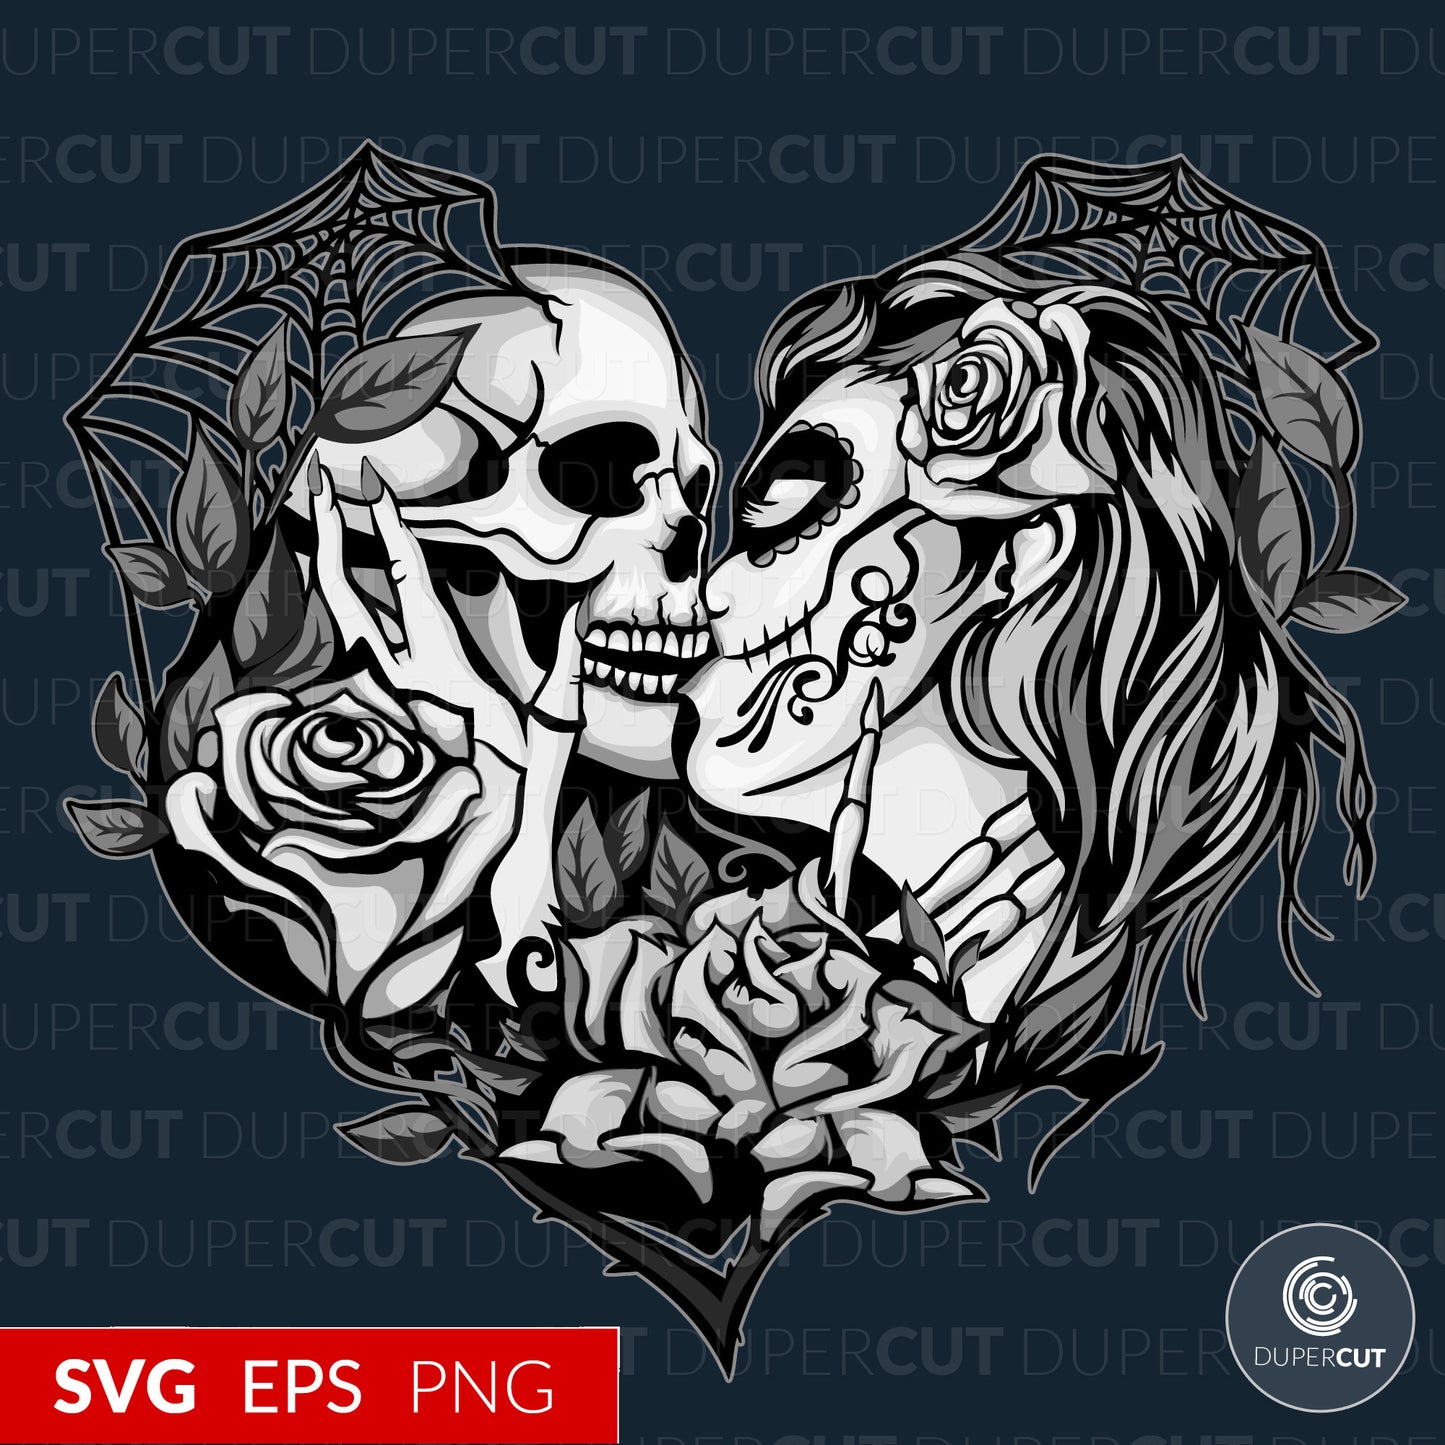 Kissing Skulls bride and groom, black and white - Custom apparel design, Amazon merch template - EPS, SVG, PNG files. Vector Colour illustration for print on demand, sublimation, custom t-shirts, hoodies, tumblers.